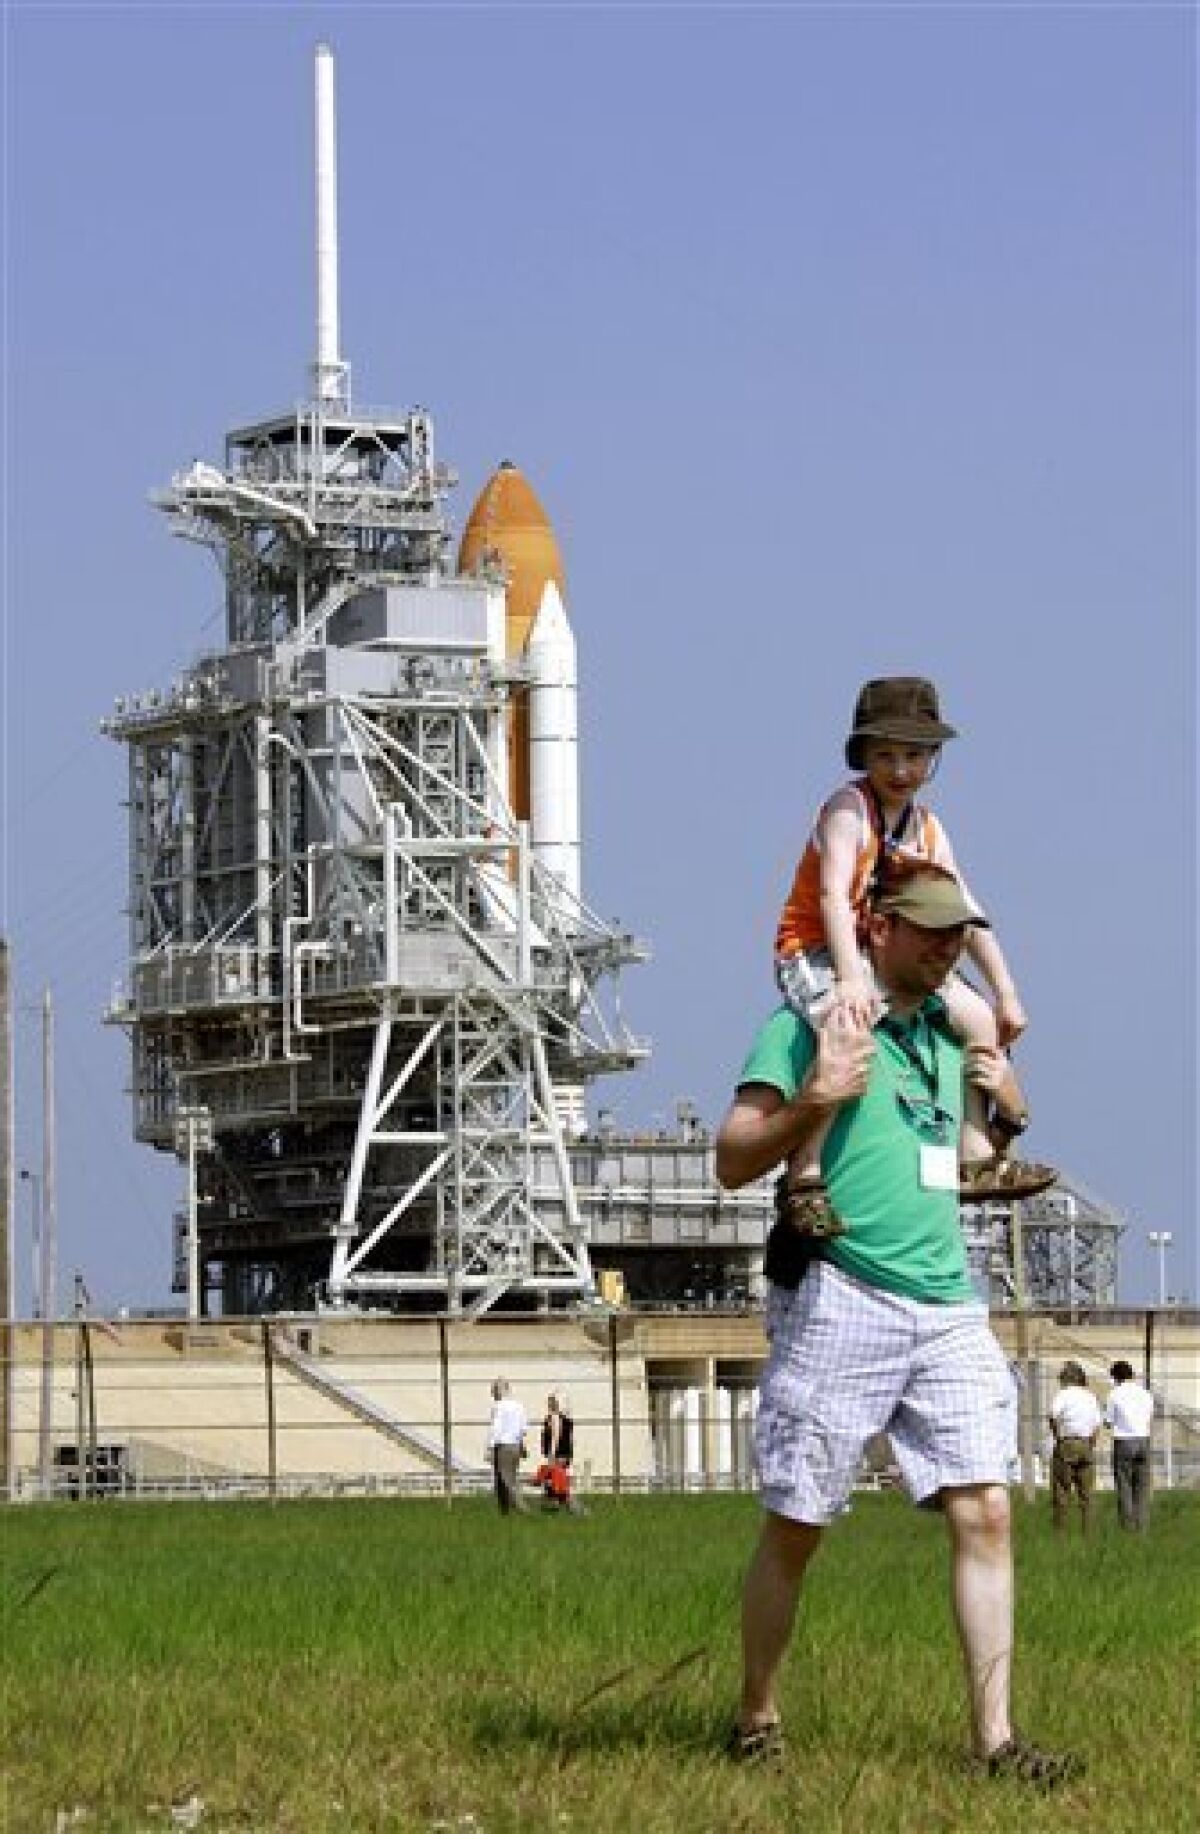 Five-year-old Thomas Pittson, of Montreal, Canada, gets a ride on his father Nick's shoulders as they walk near the space shuttle Endeavour Thursday June 11, 2009 at the Kennedy Space Center in Cape Canaveral, Fla. Seven astronauts are scheduled to liftoff early Saturday morning for a trip to the international space station. (AP Photo/Terry Renna)